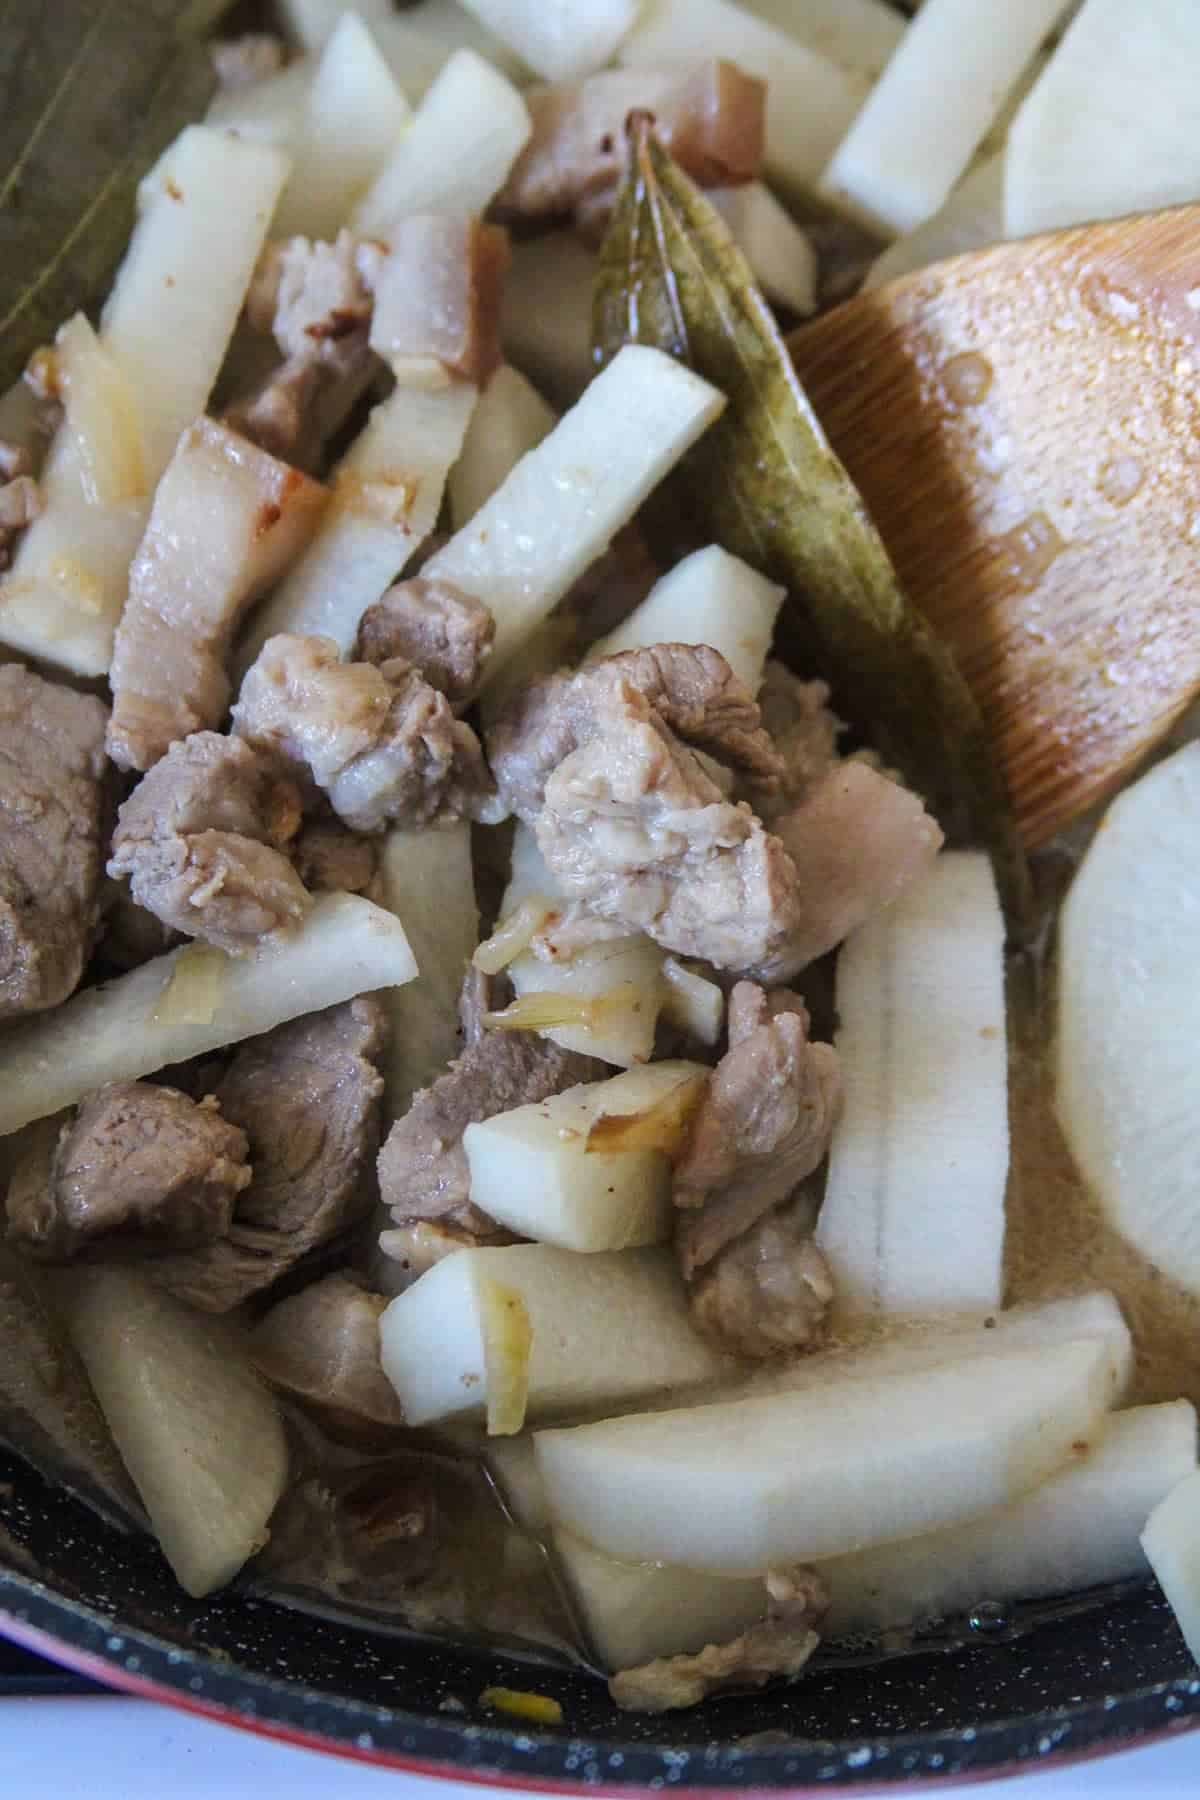 kilawing baboy with labanos in a pan